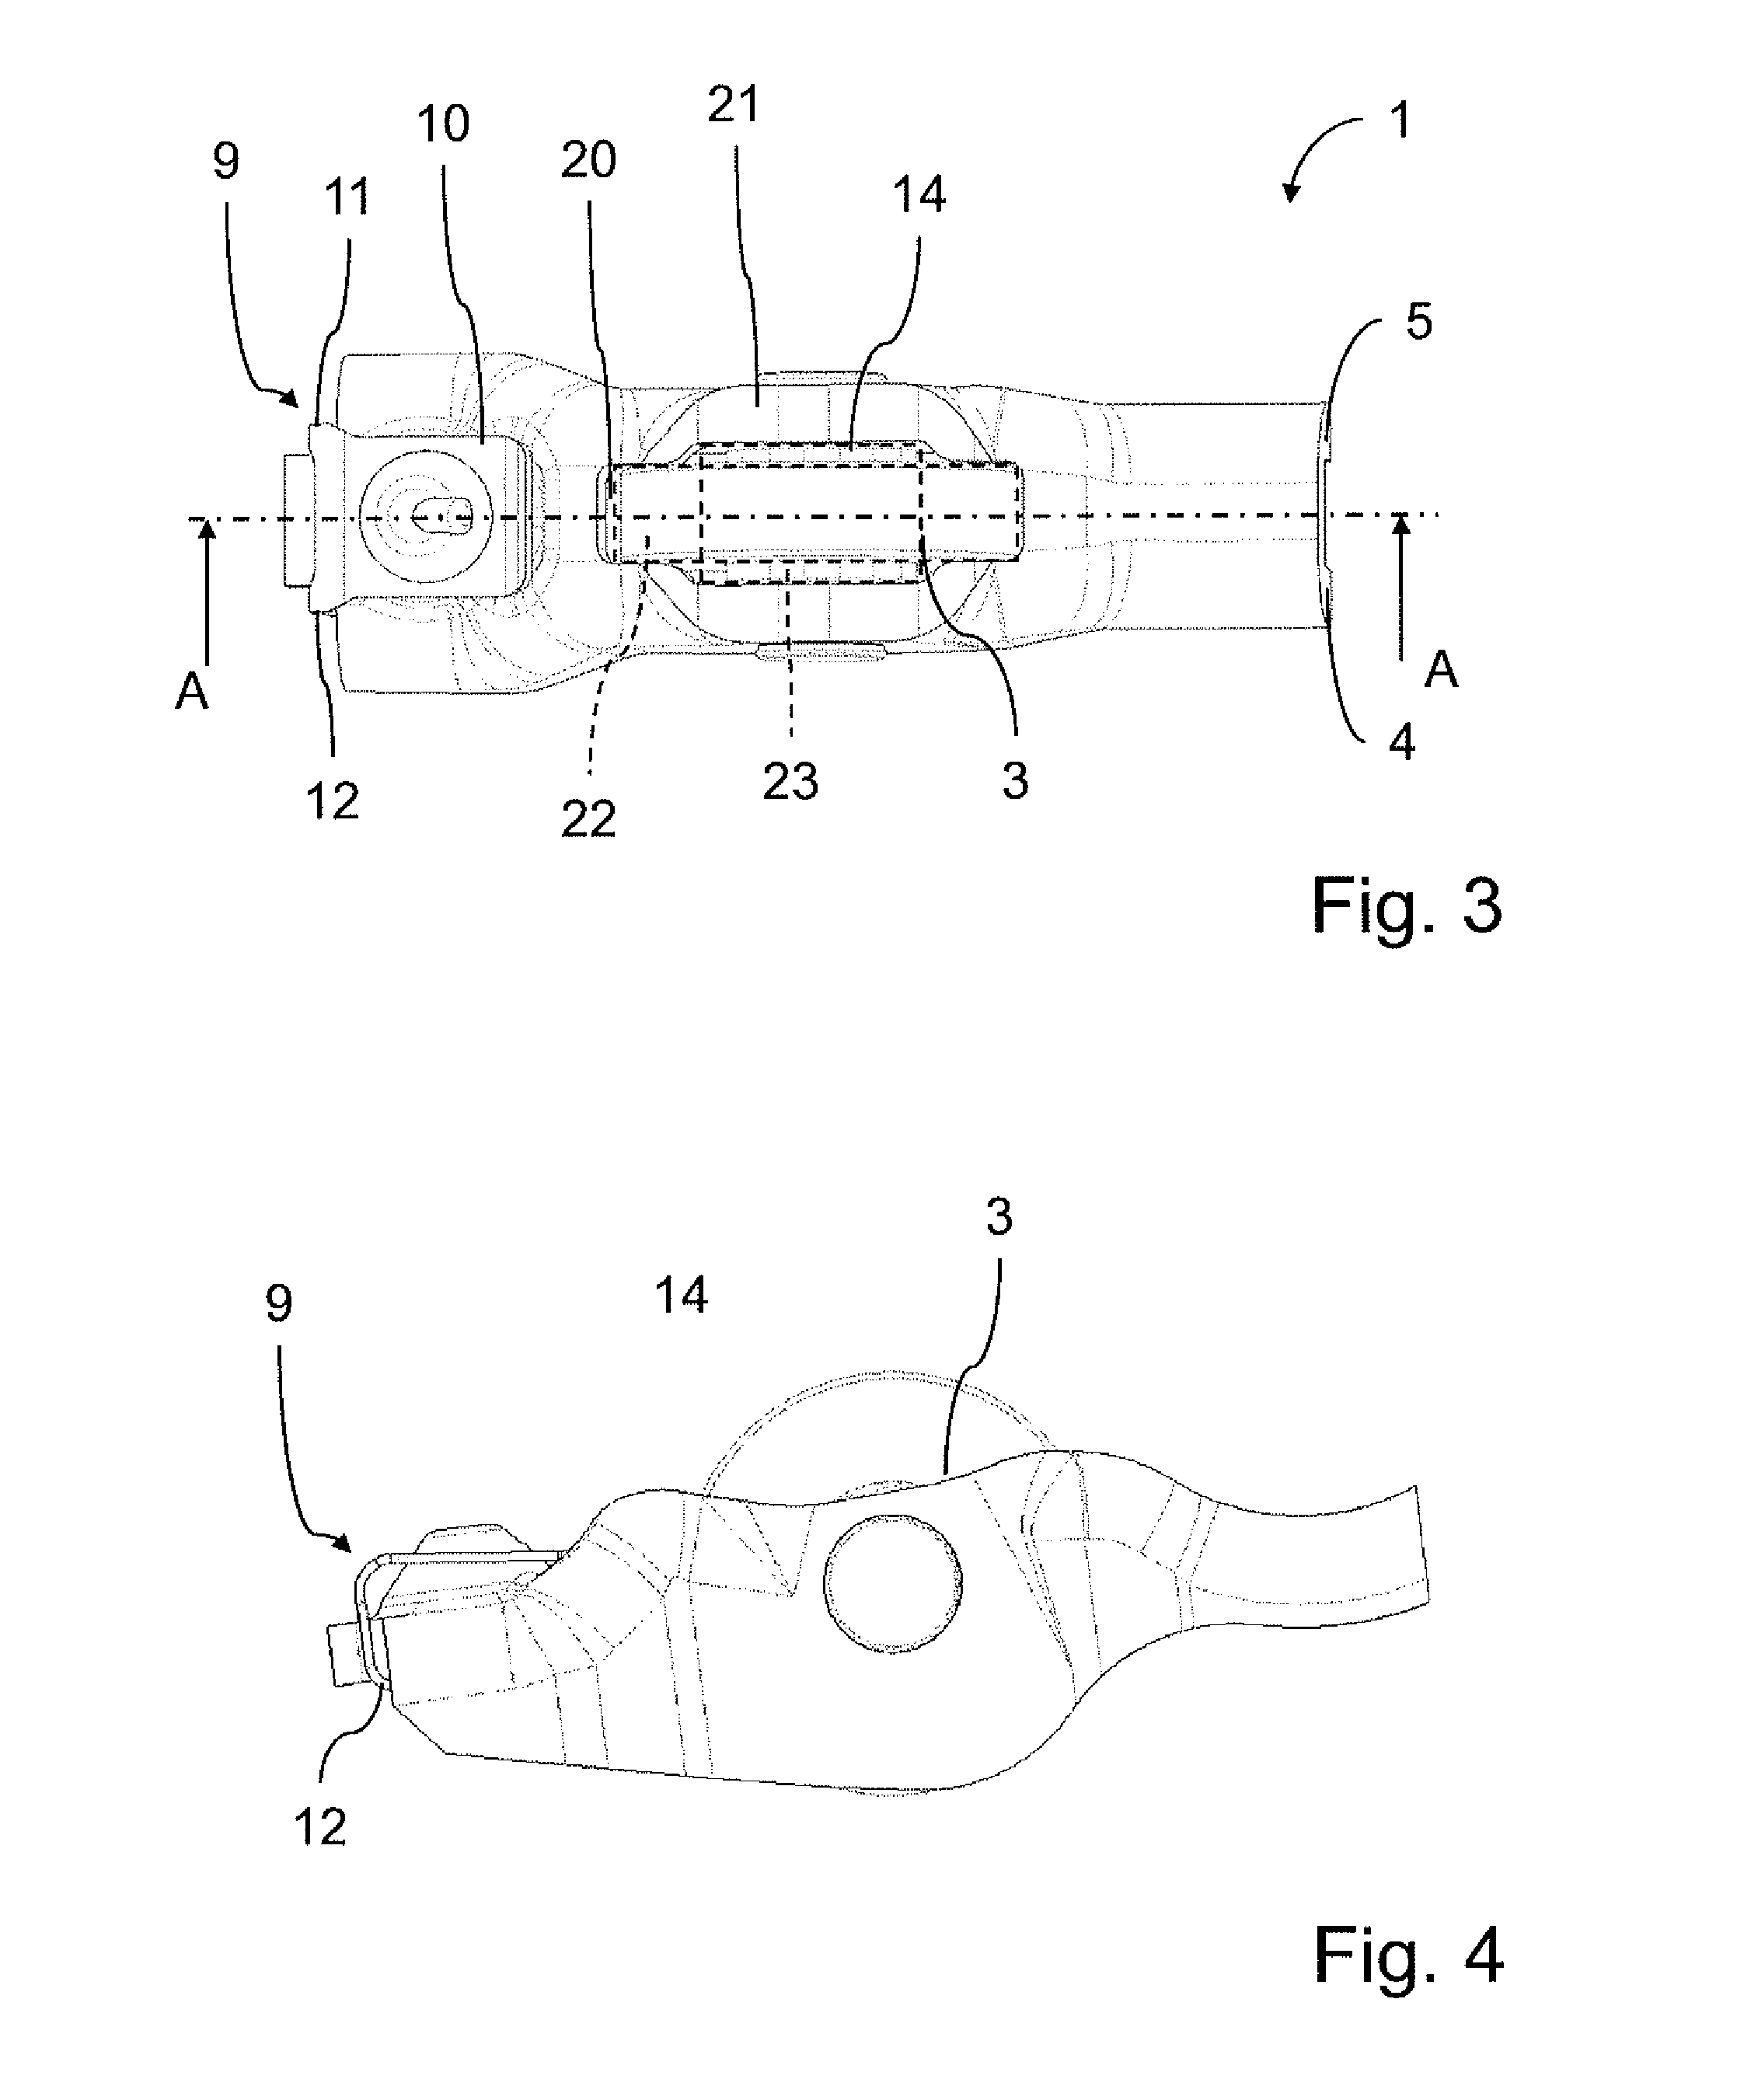 Finger follower lever for actuating a gas exchange valve